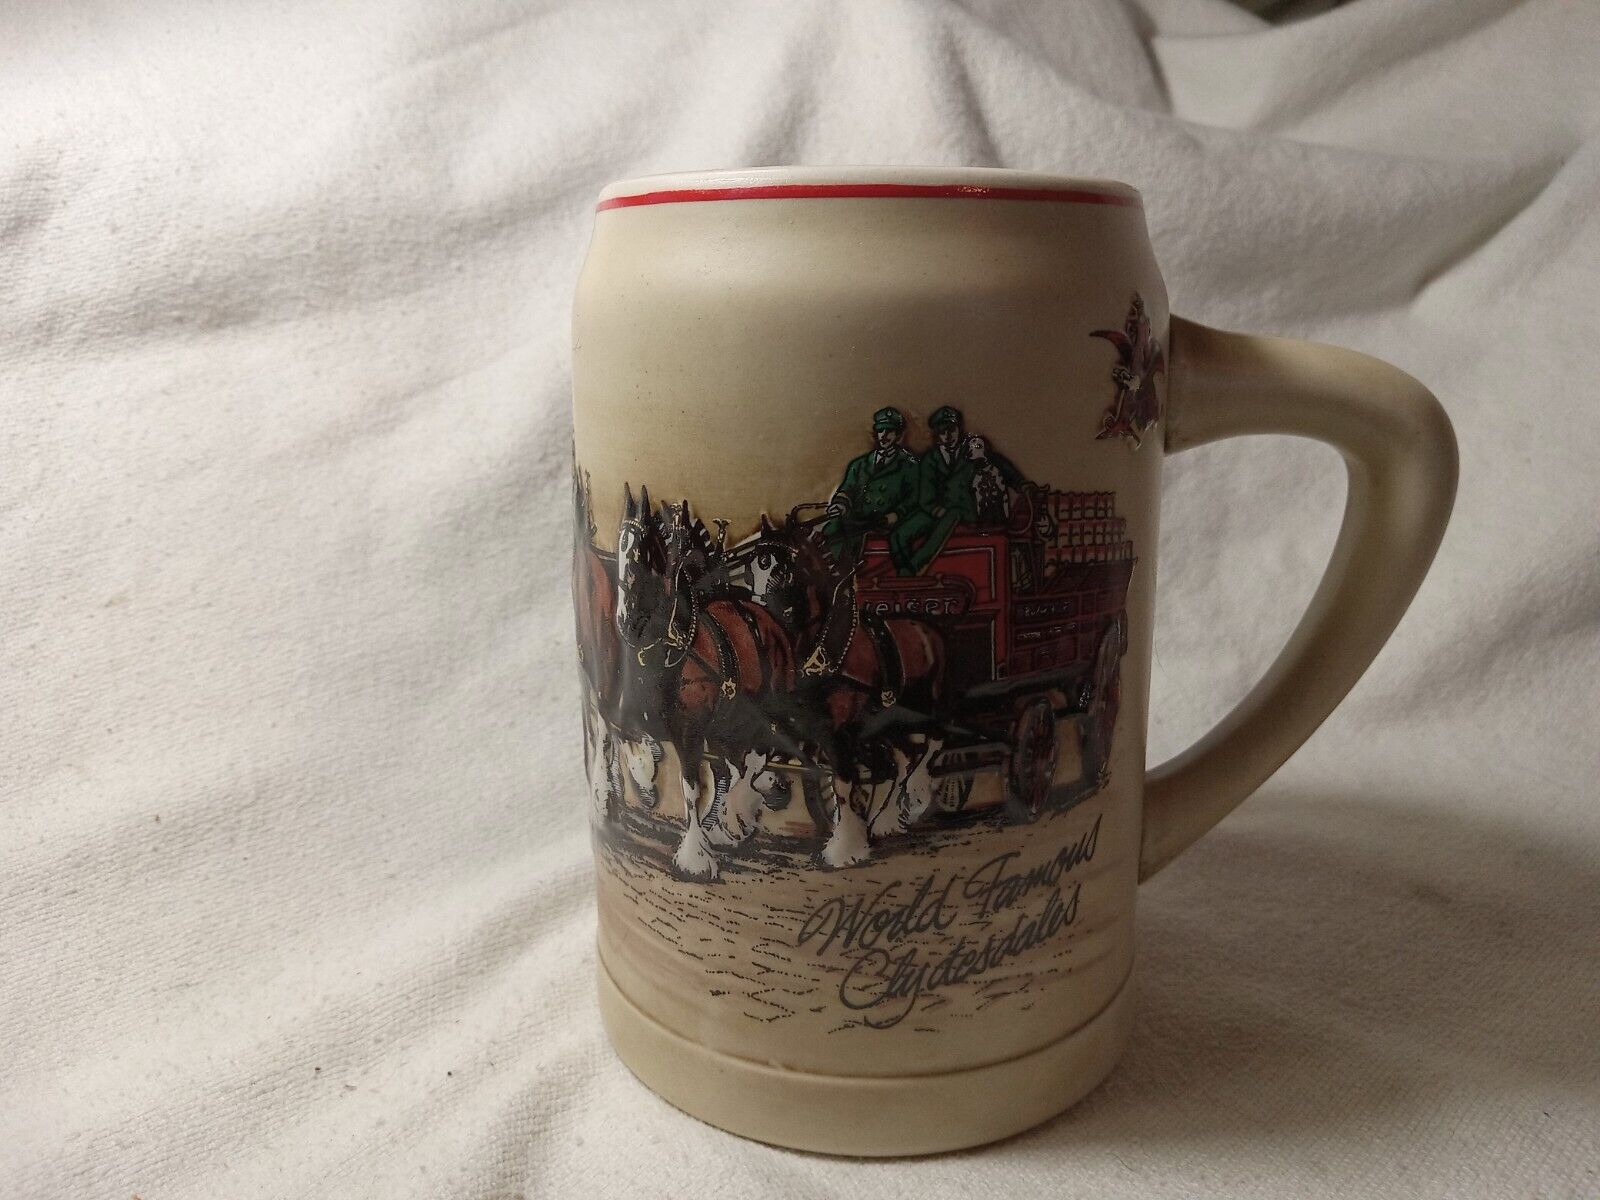 Vintage Budweiser “World Famous Clydesdales” Beer Stein (R304)